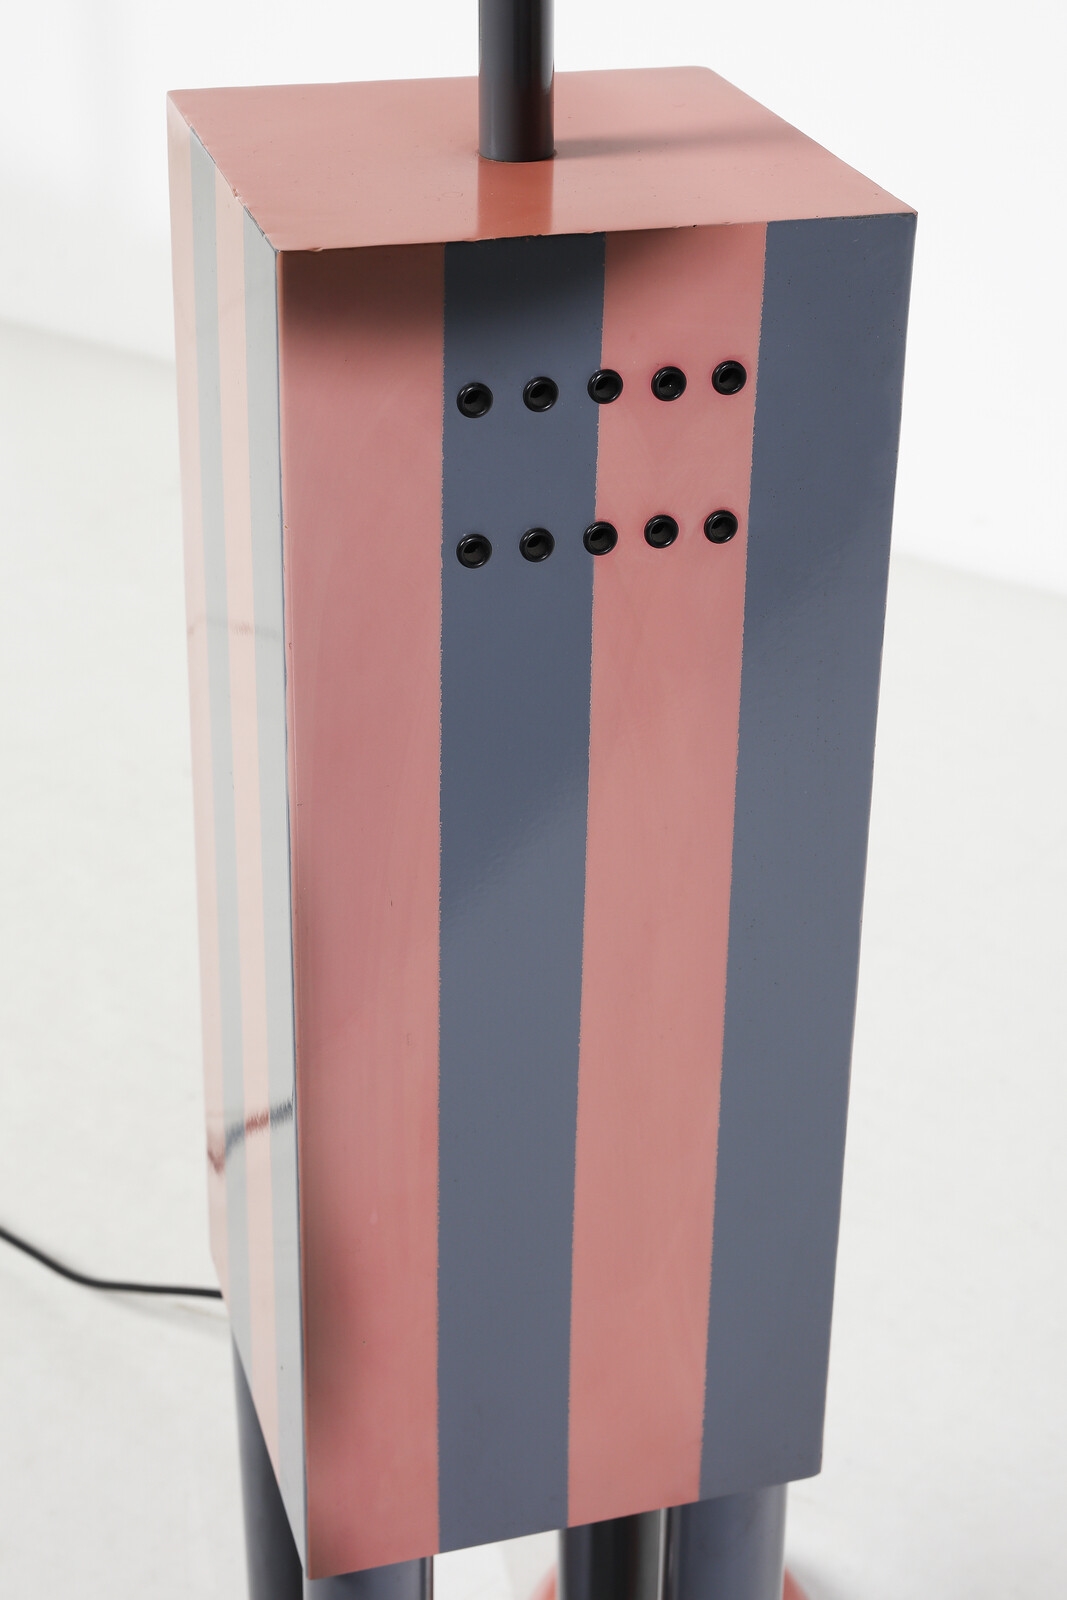 Artwork by Martine Bedin, Terminus floor lamp for Memphis, Milano, Made of Technique : Painted metal